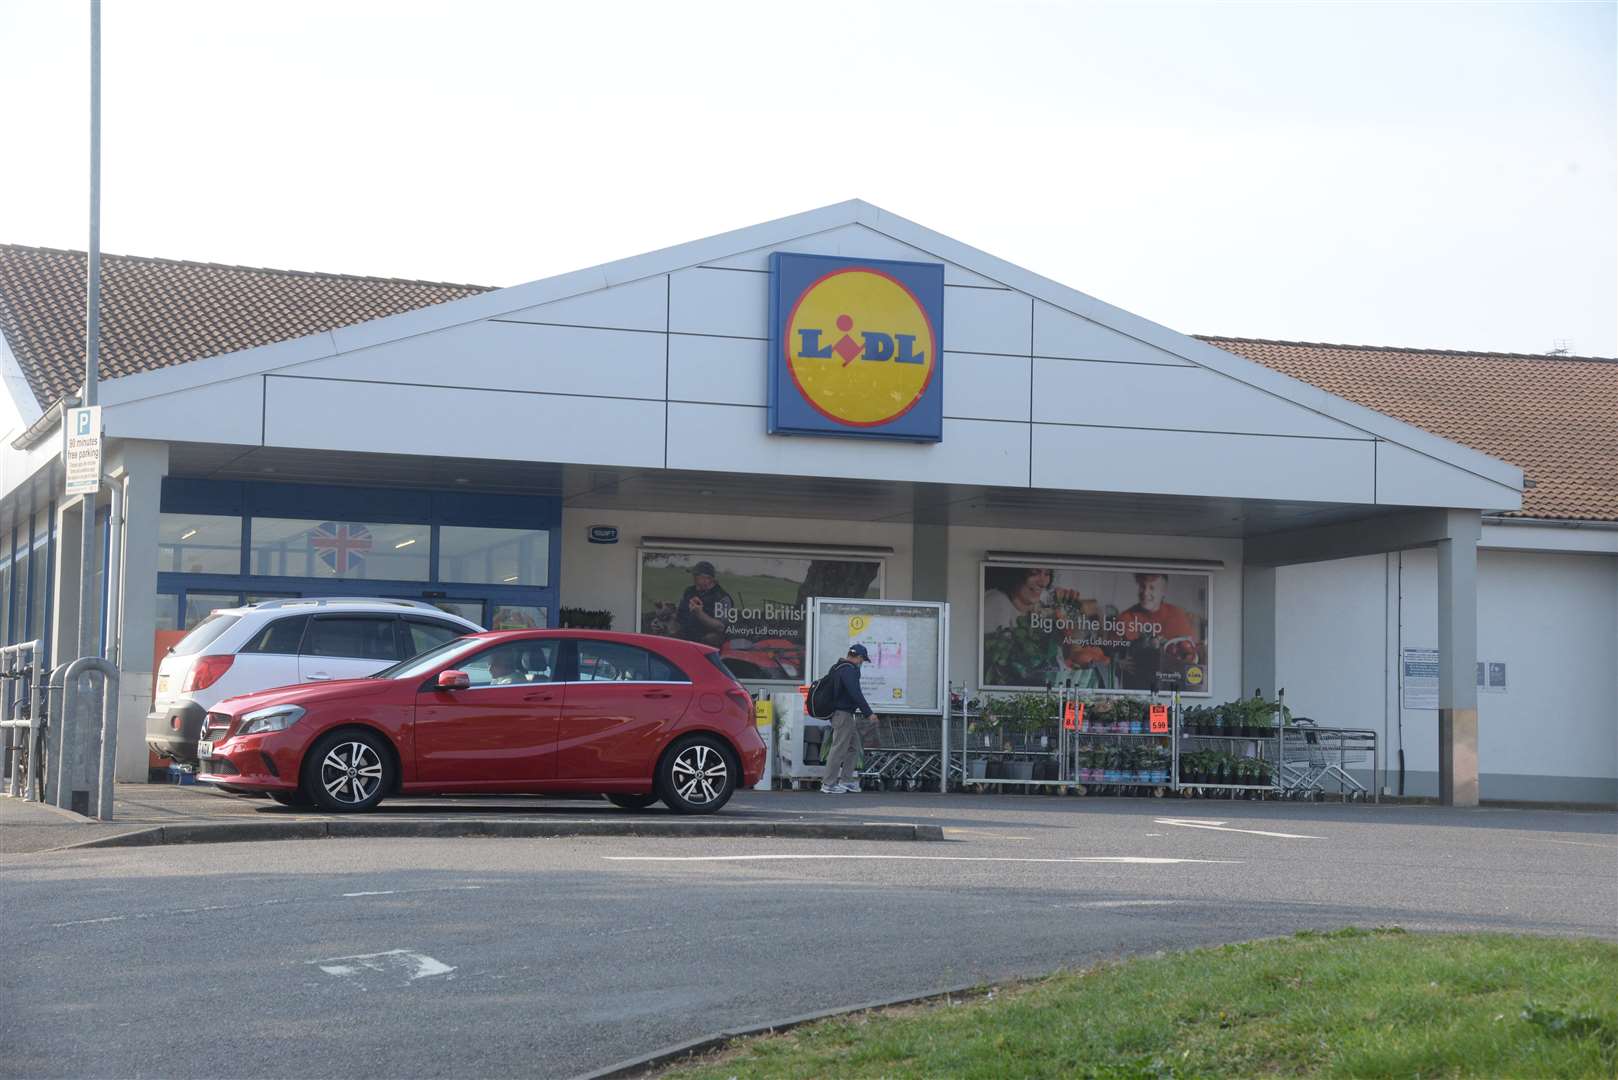 Aldi would be just a stone's throw from Canterbury's Lidl